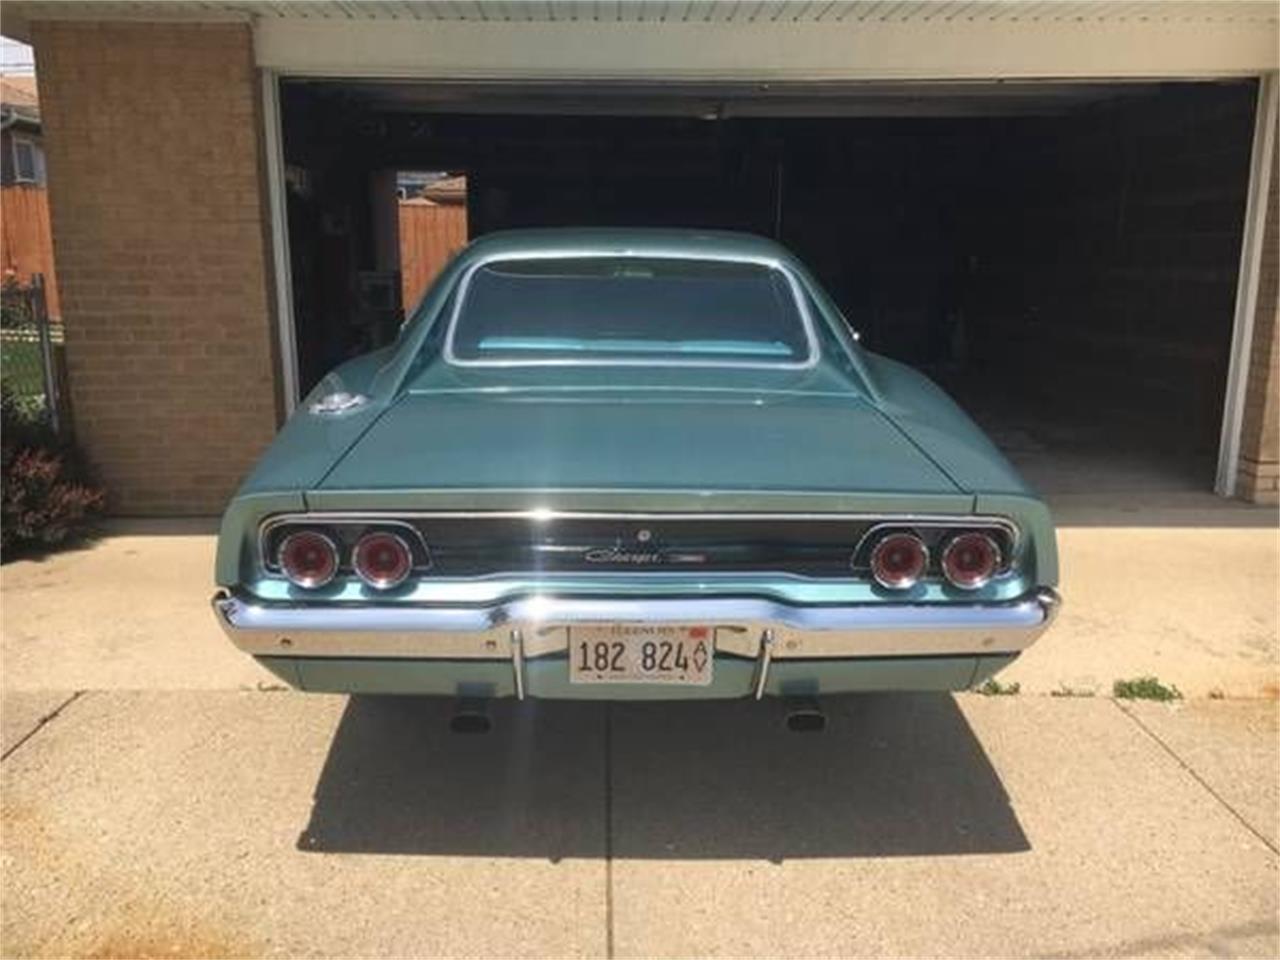 1968 Dodge Charger for sale in Cadillac, MI